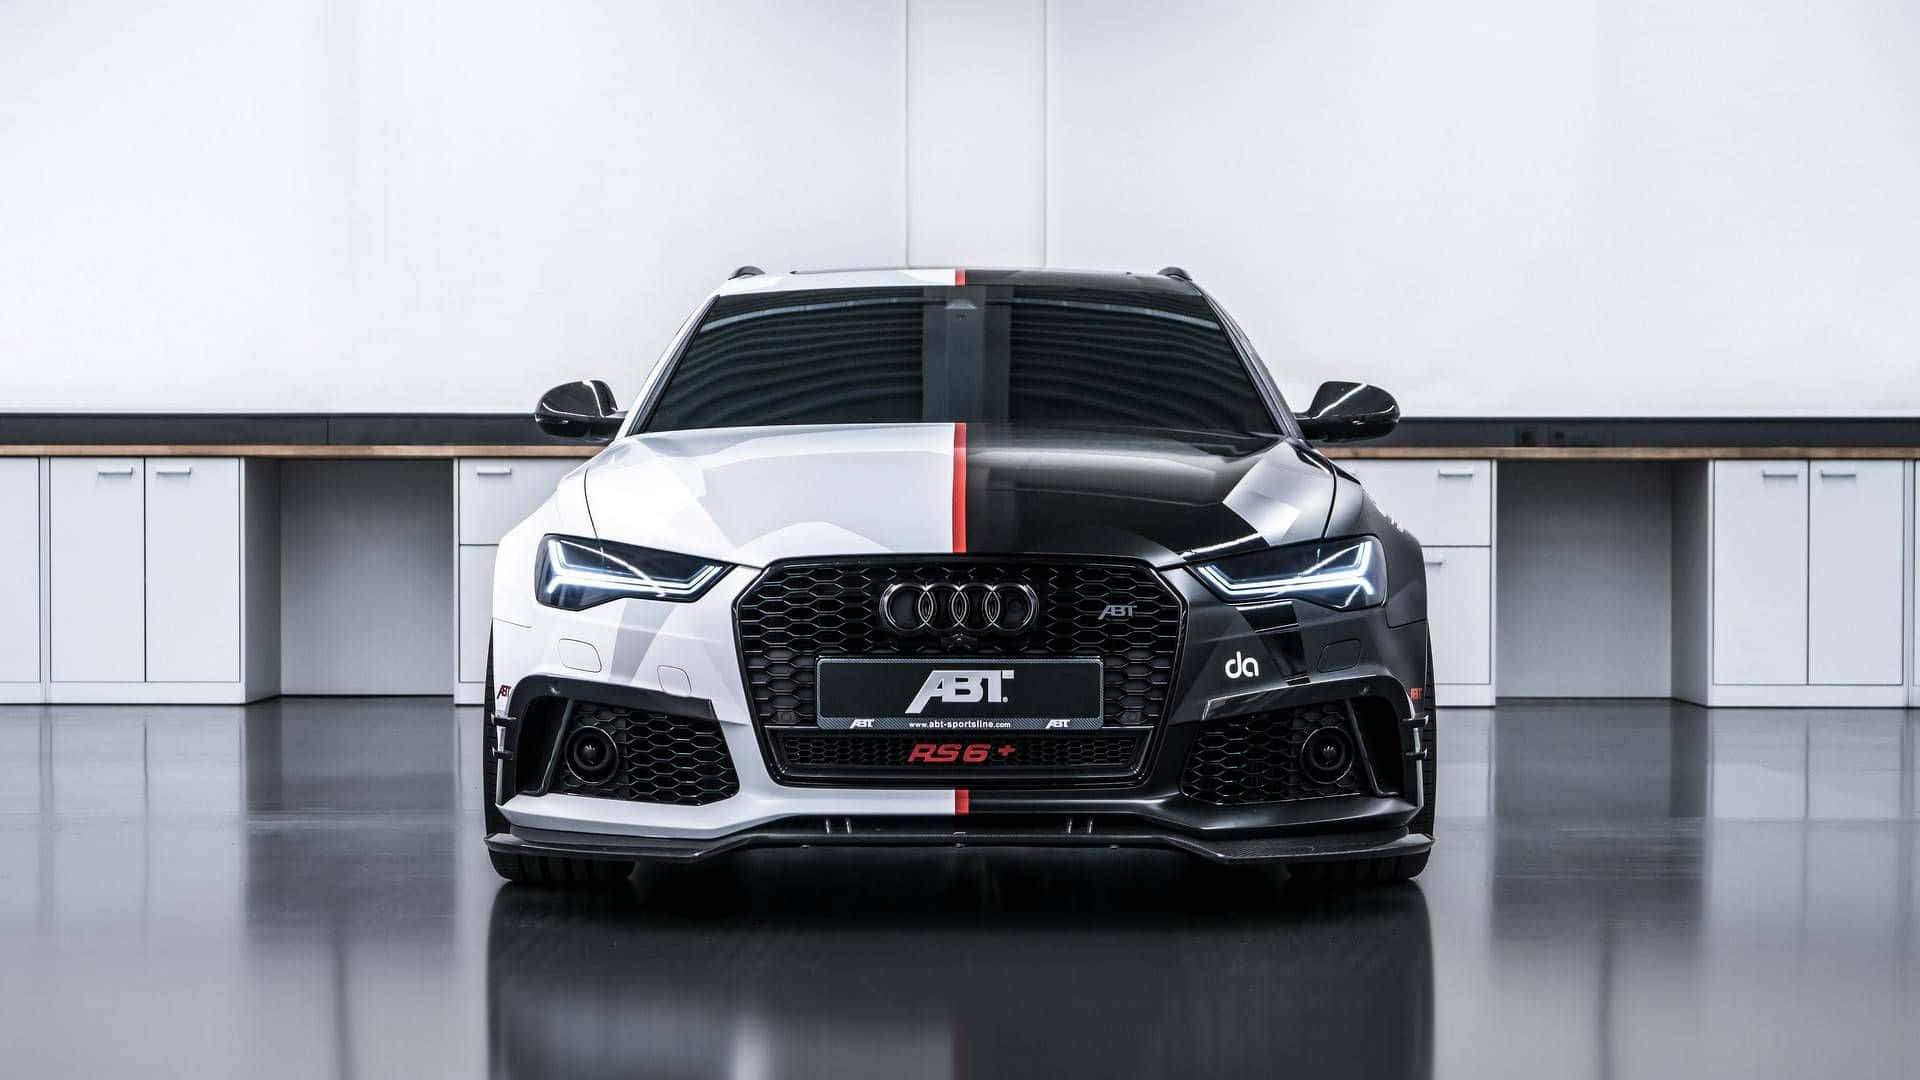 Sleek and Powerful Audi RS6 in Action Wallpaper